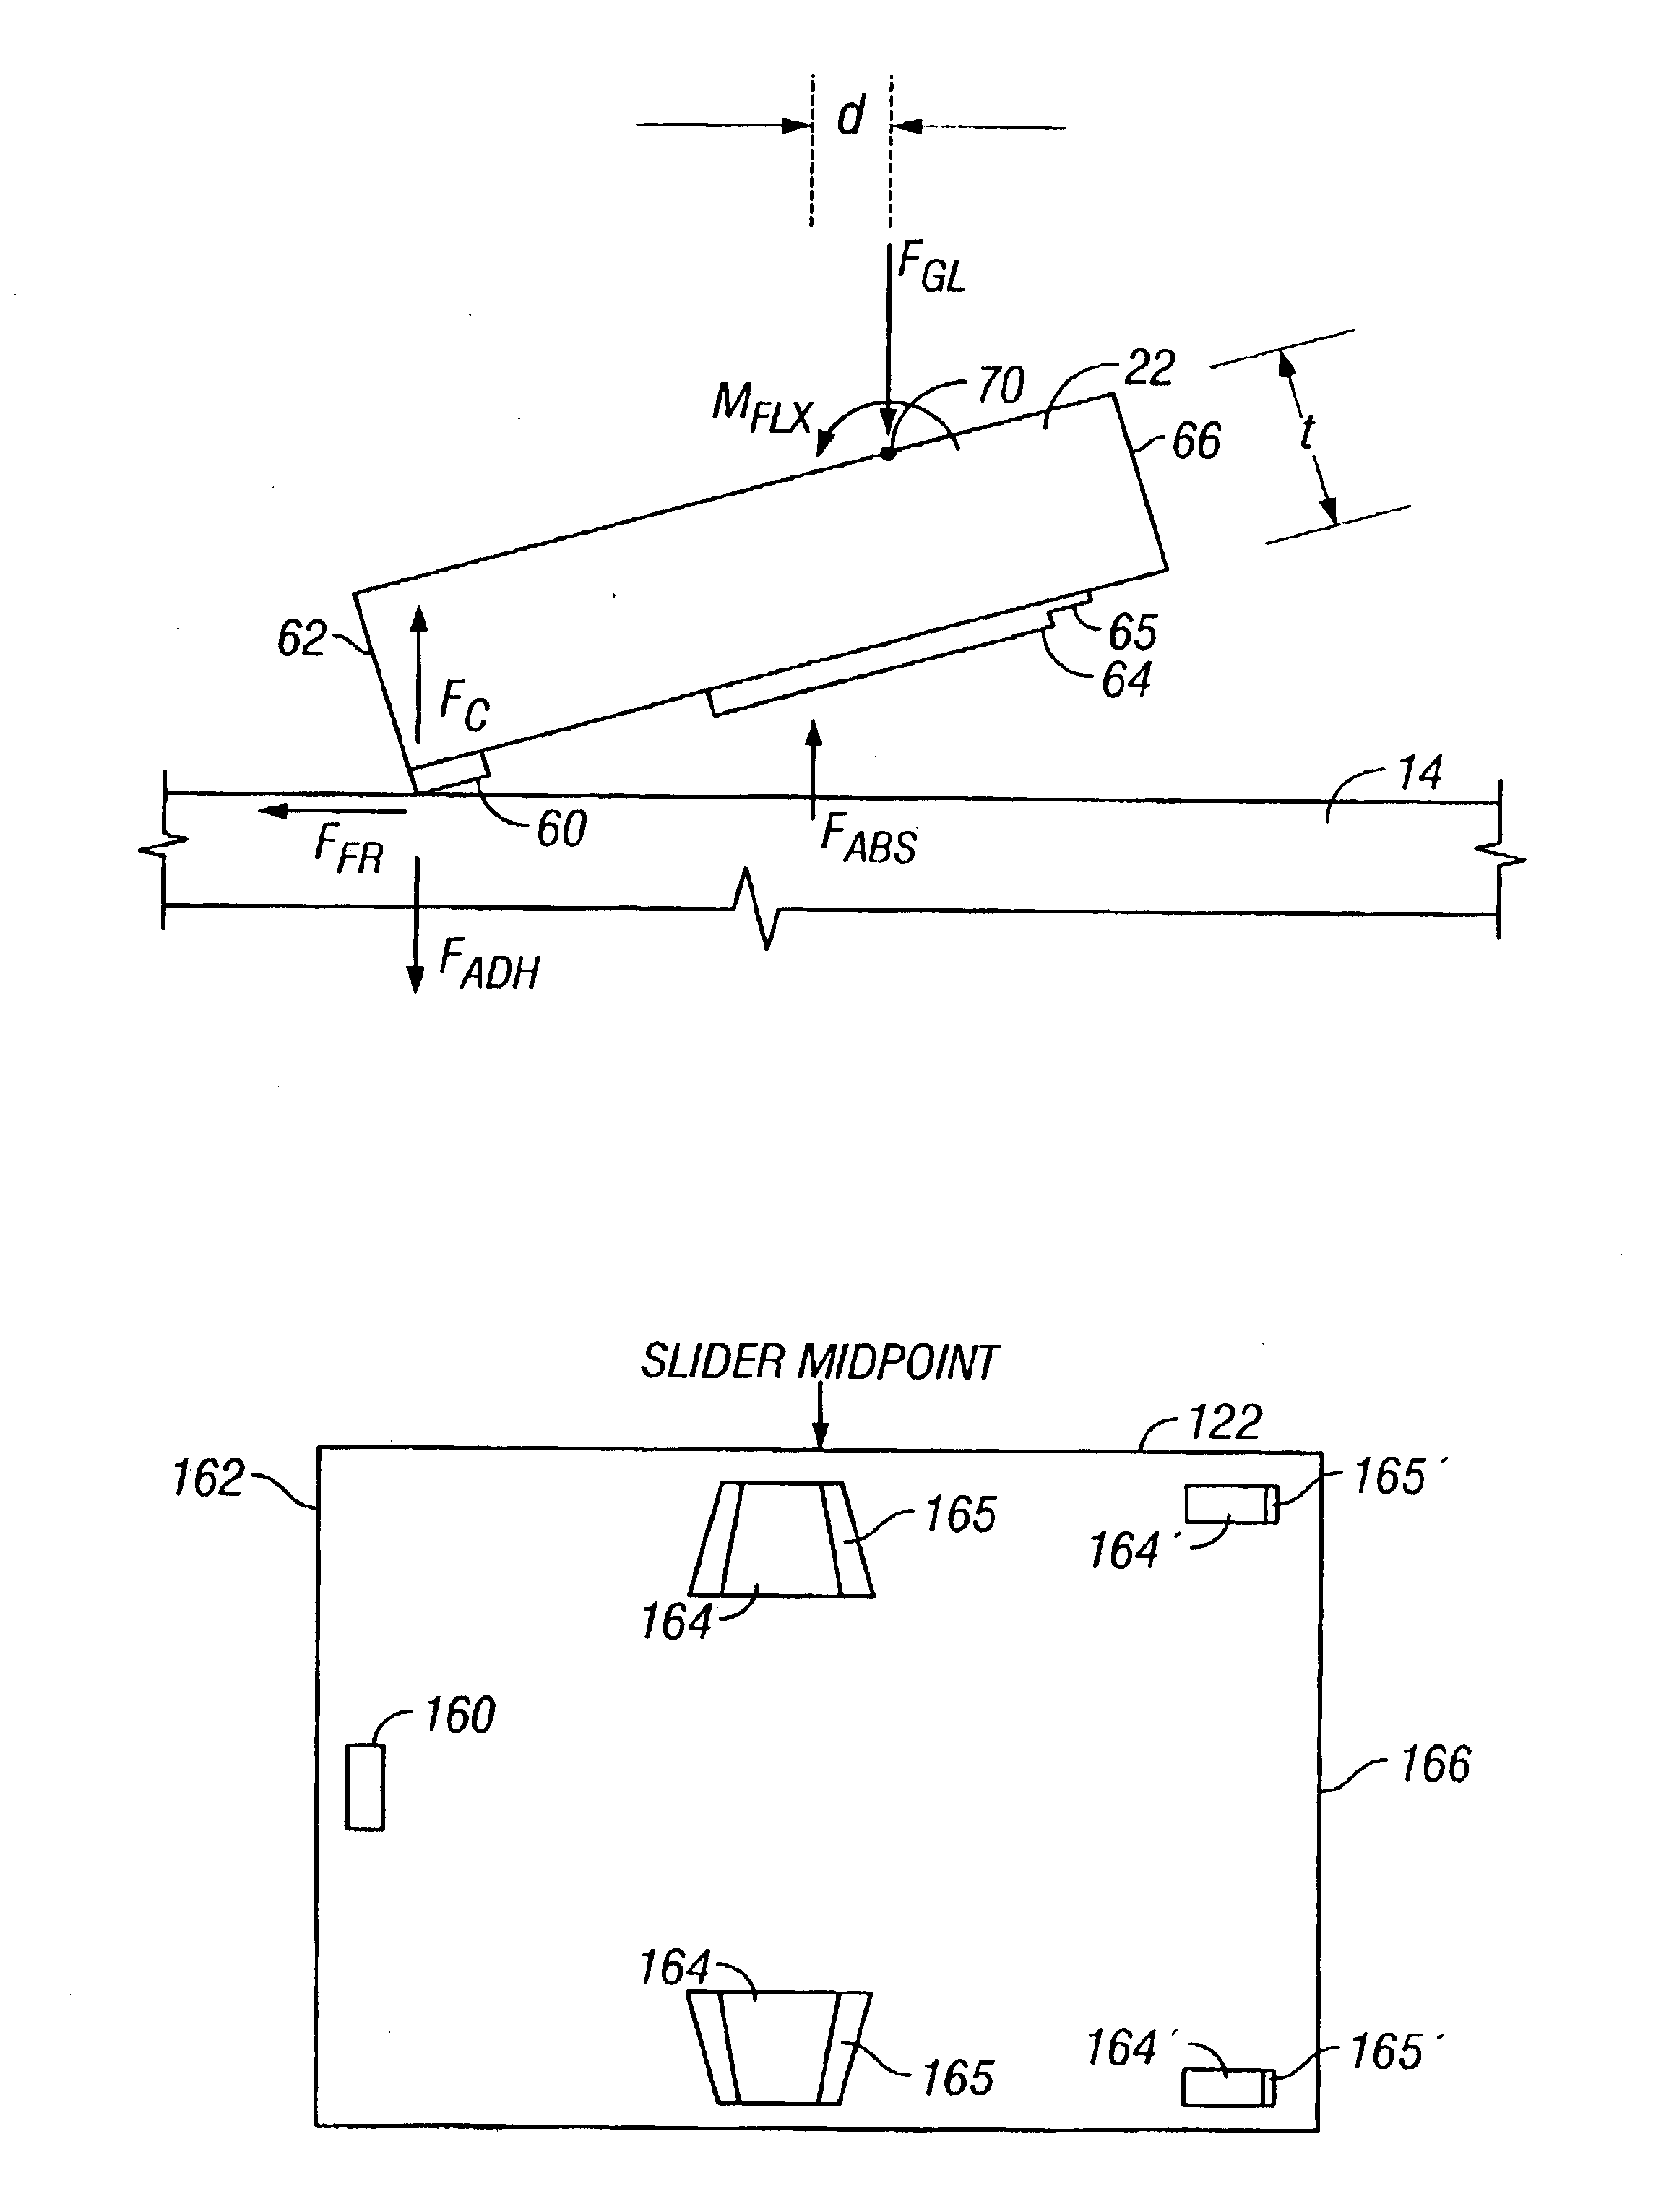 Magnetic recording disk drive with continuous contact air-bearing slider